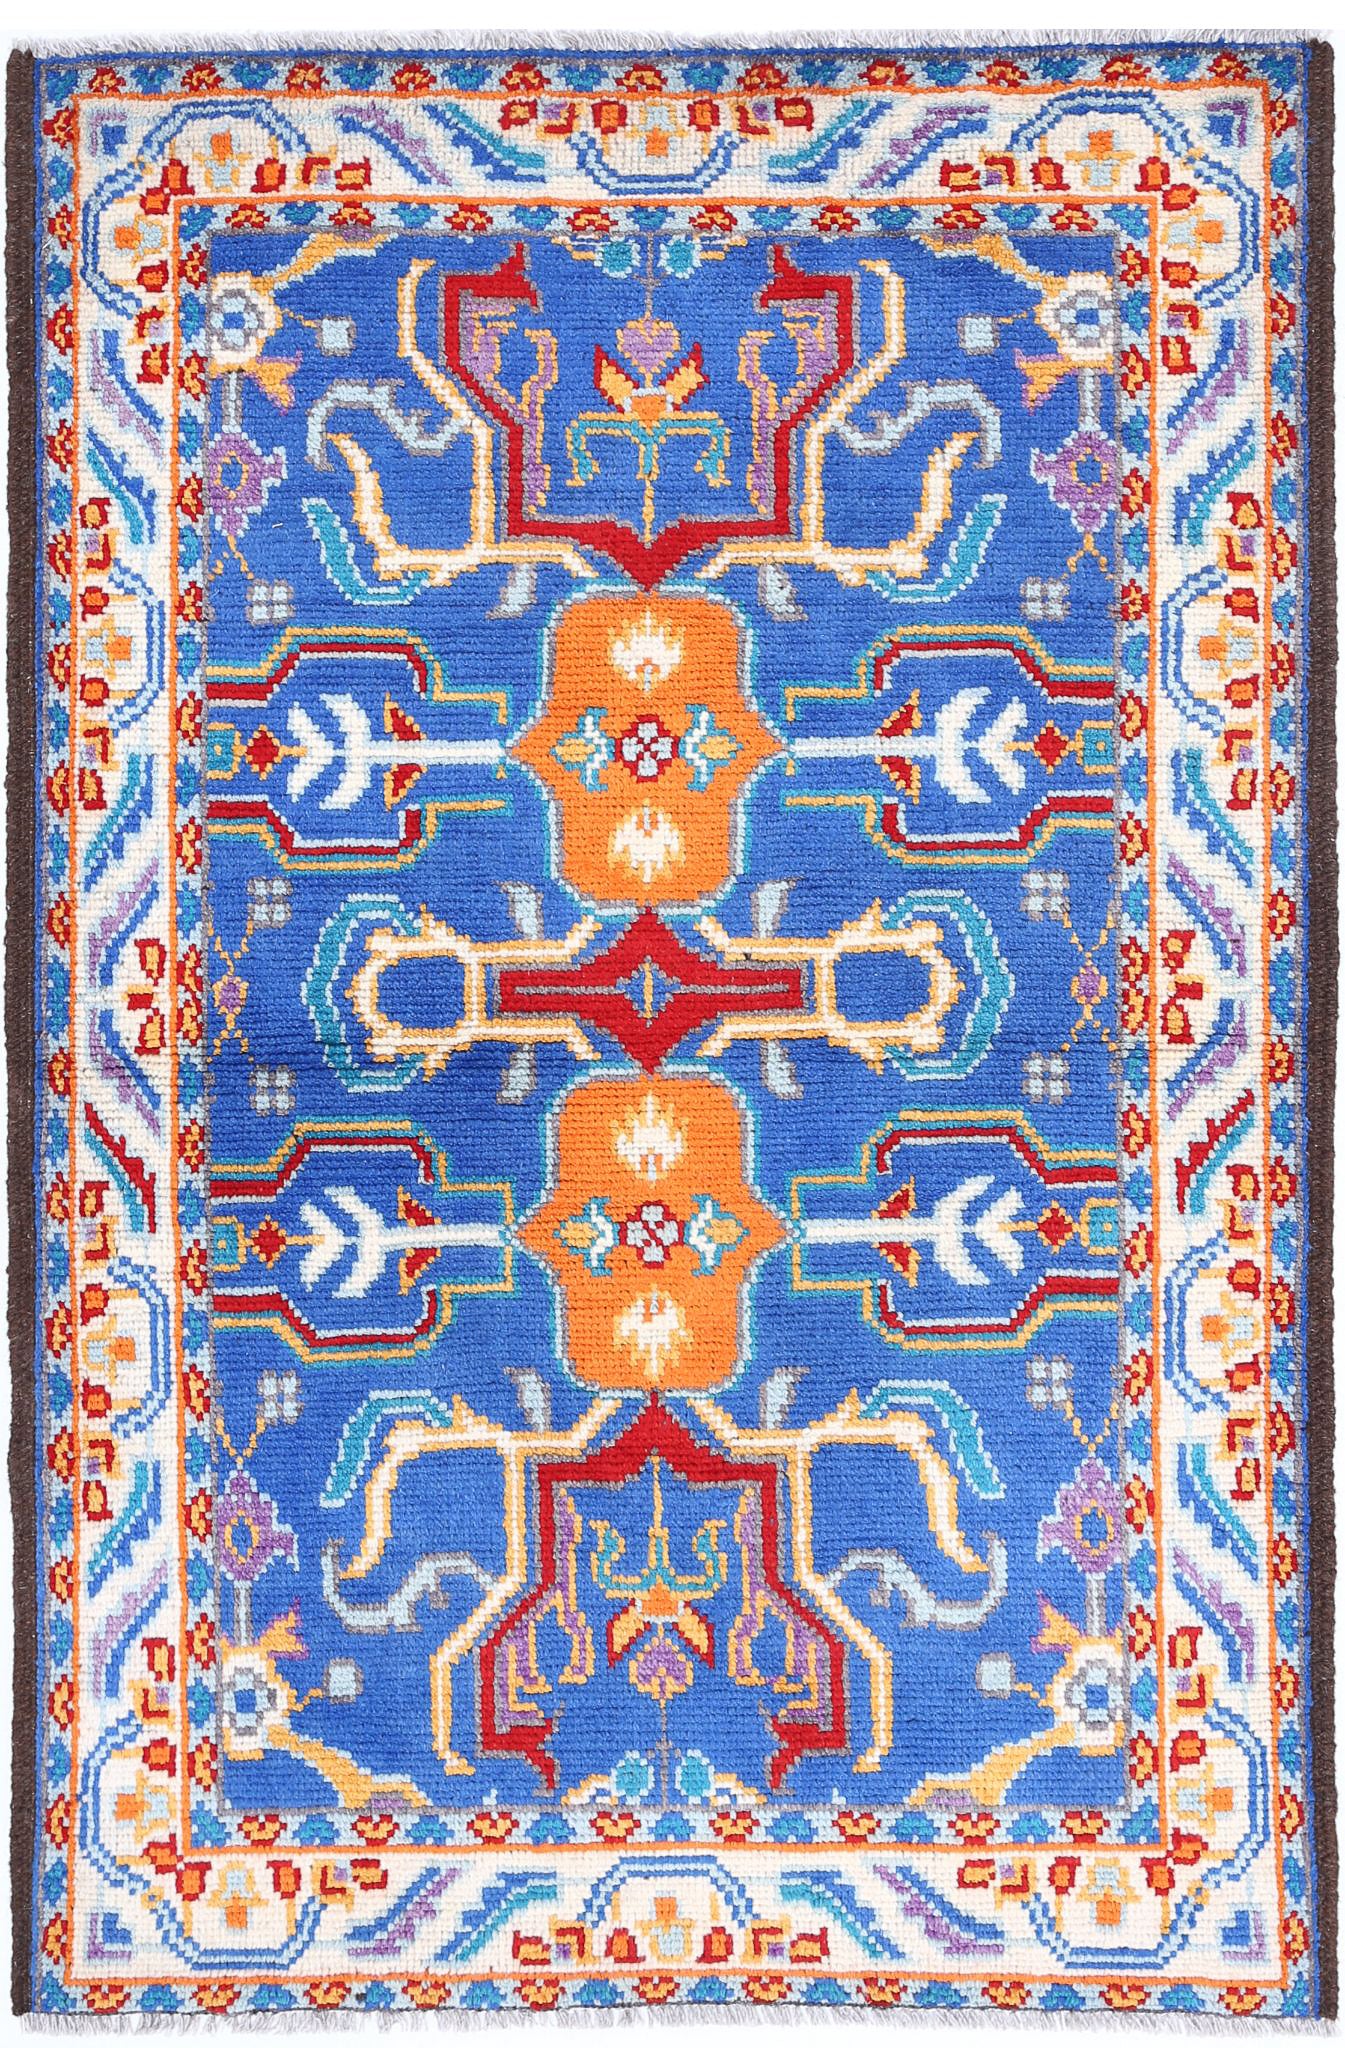 Revival-hand-knotted-qarghani-wool-rug-5014201.jpg